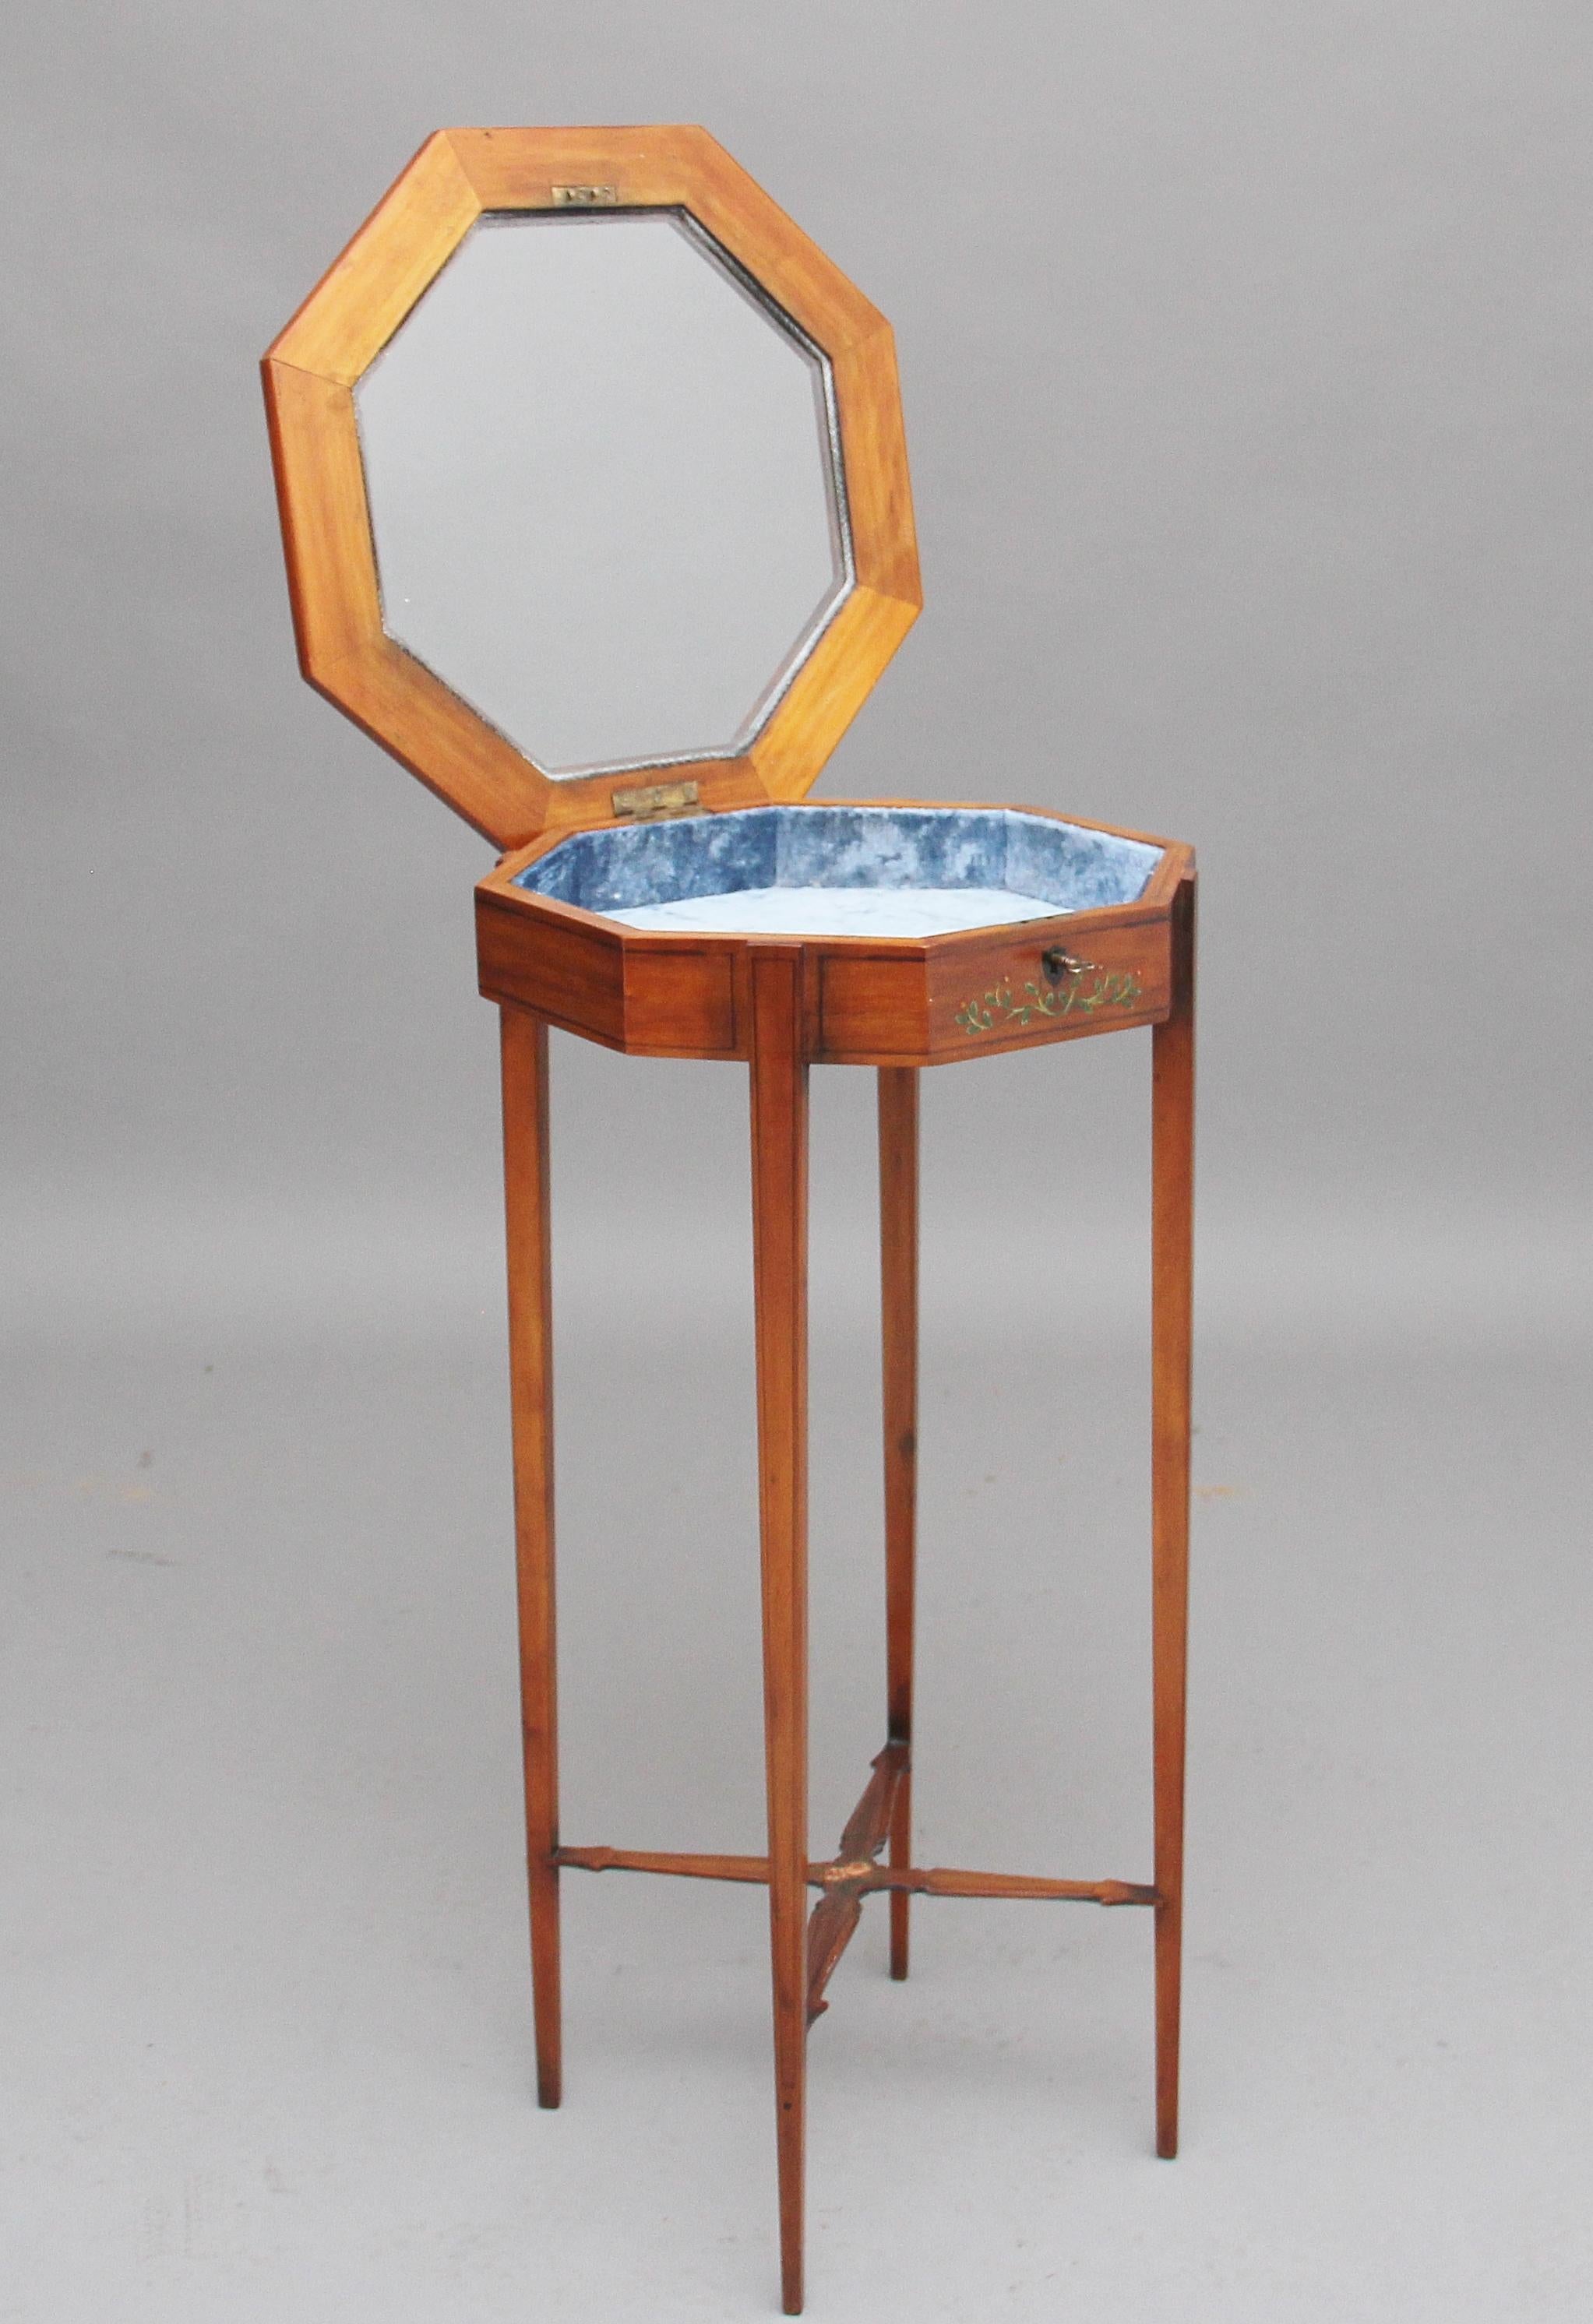 19th century satinwood and painted bijouterie table, with a hinged lift up octagonal glazed top opening to reveal a blue velvet lining, the frame of the top having painted floral decoration, the frieze below also painted, the top can also be locked,